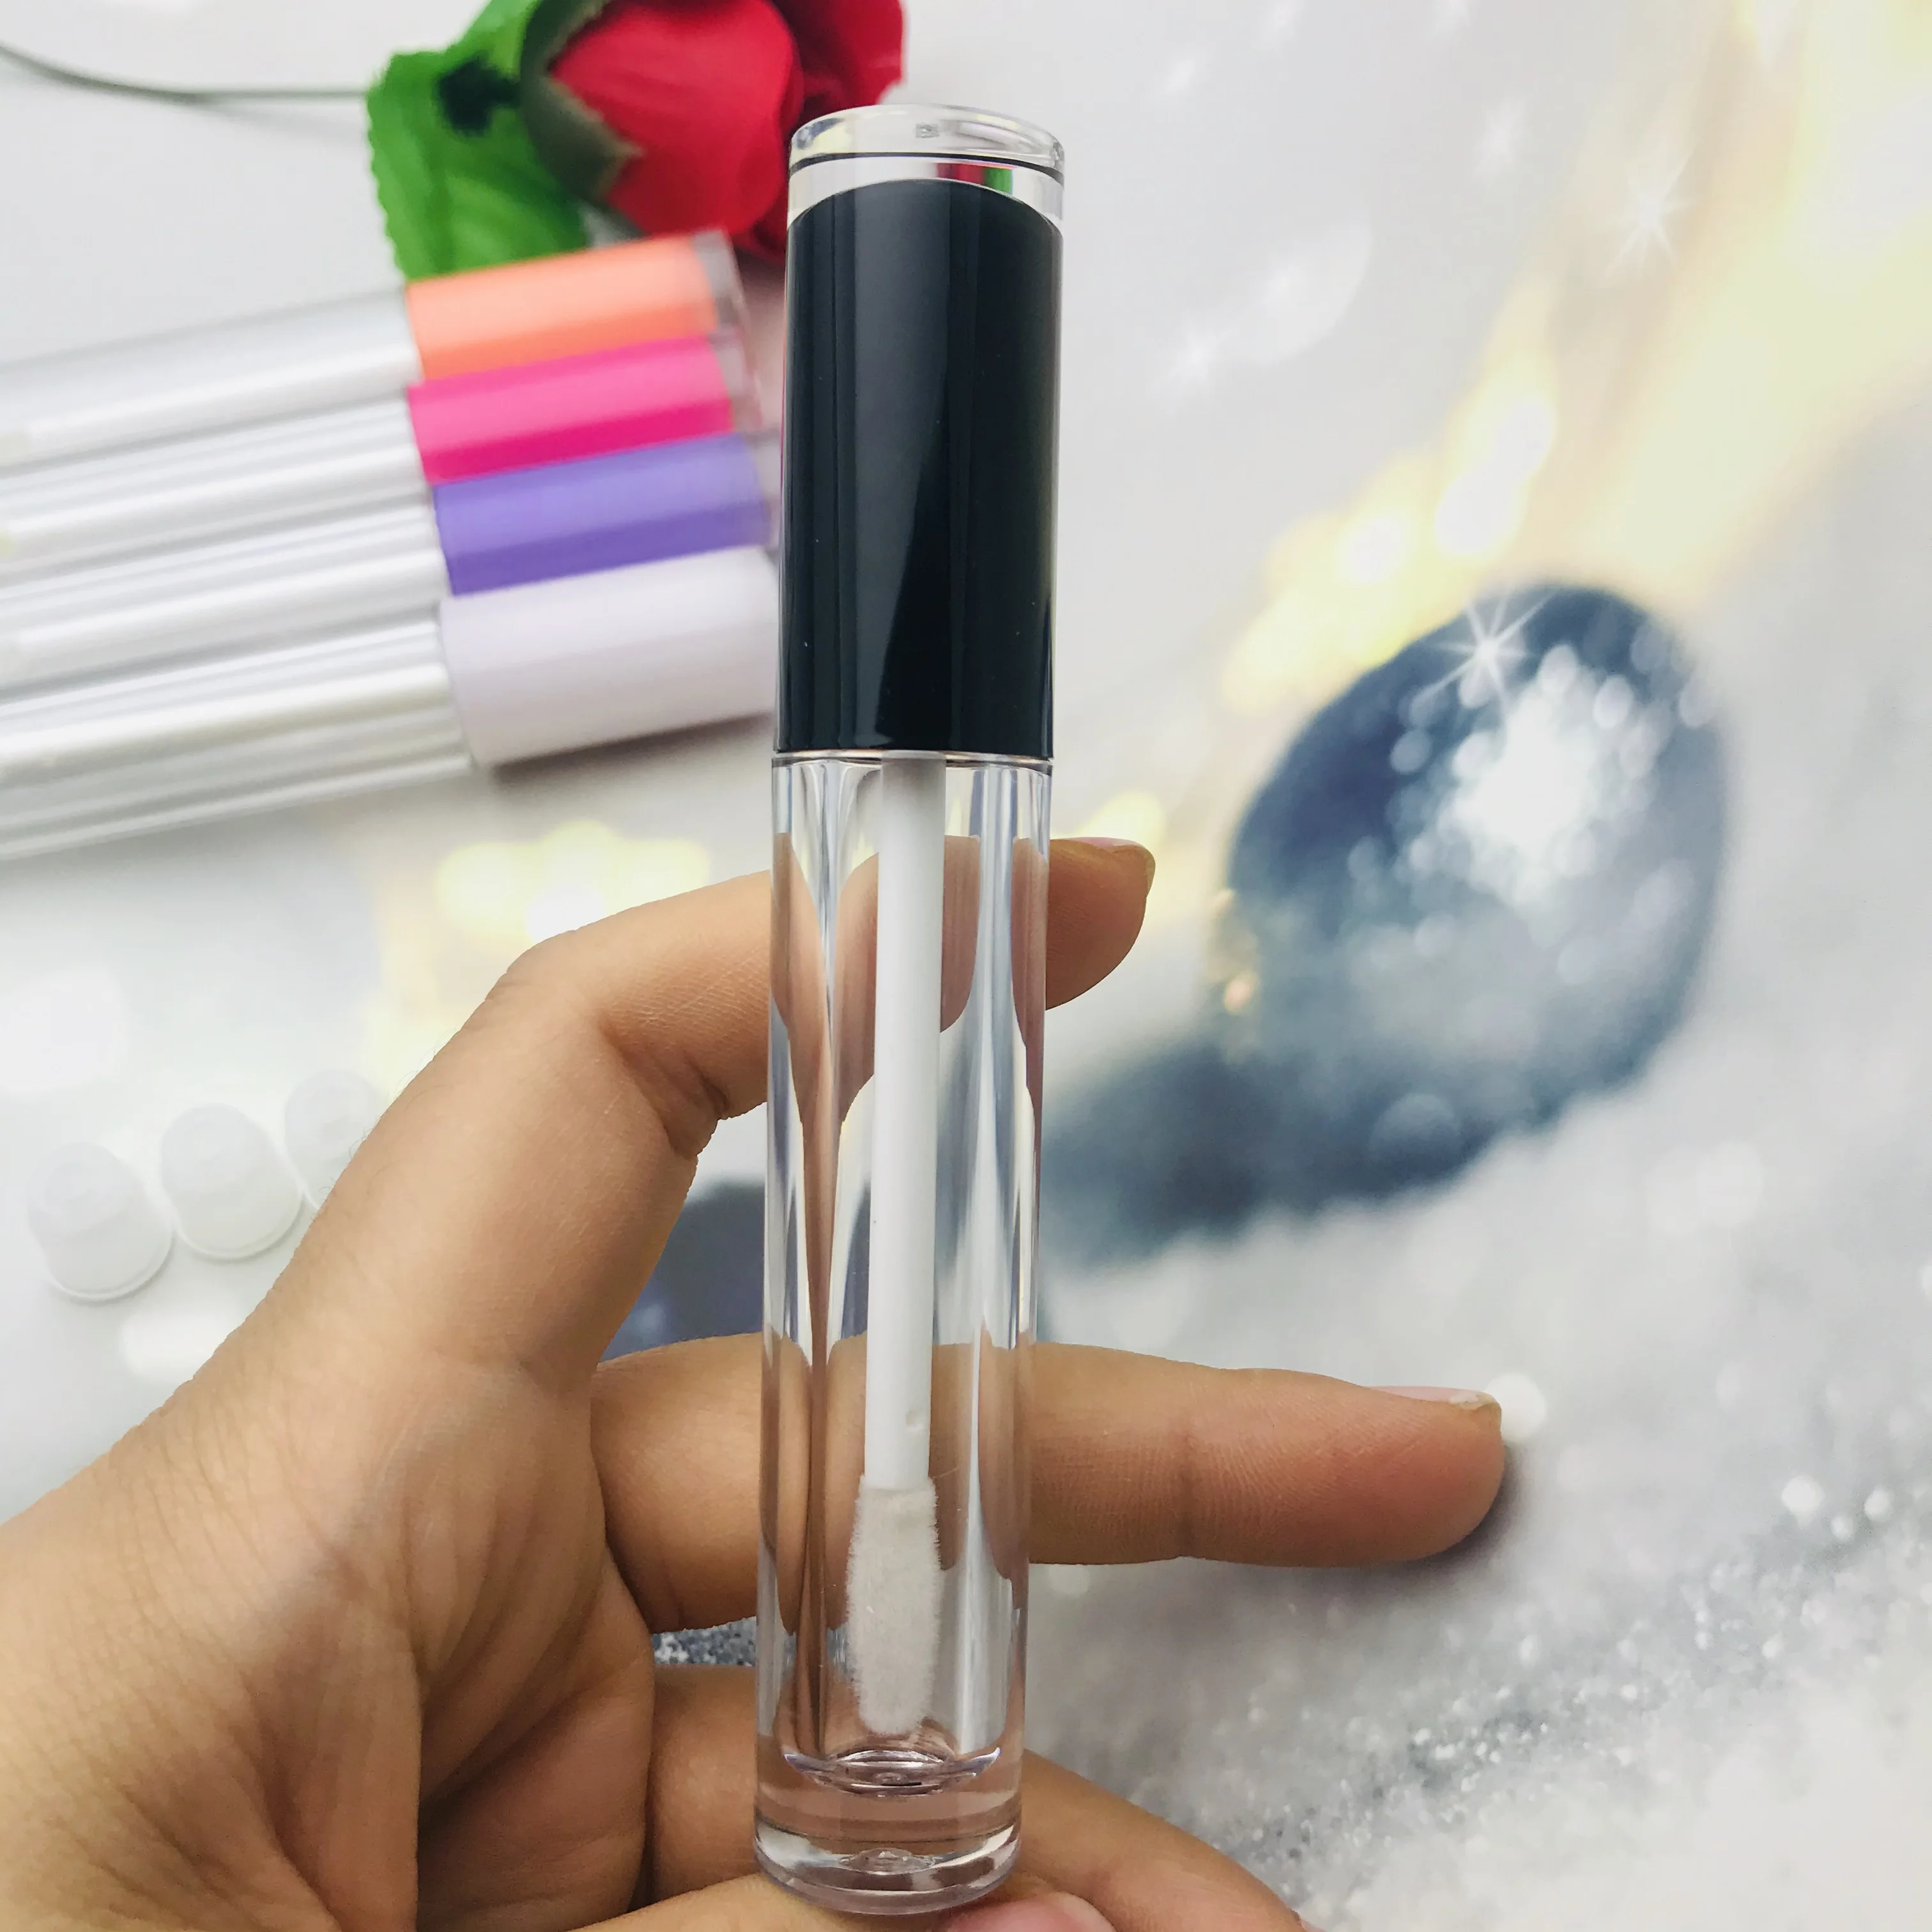 Wholesale Pretty 5ml Empty Lip gloss tubes Colorful Caps Lipstick Container DIY Liquid Lip Balm Bottles Container Make up Tools images - 6